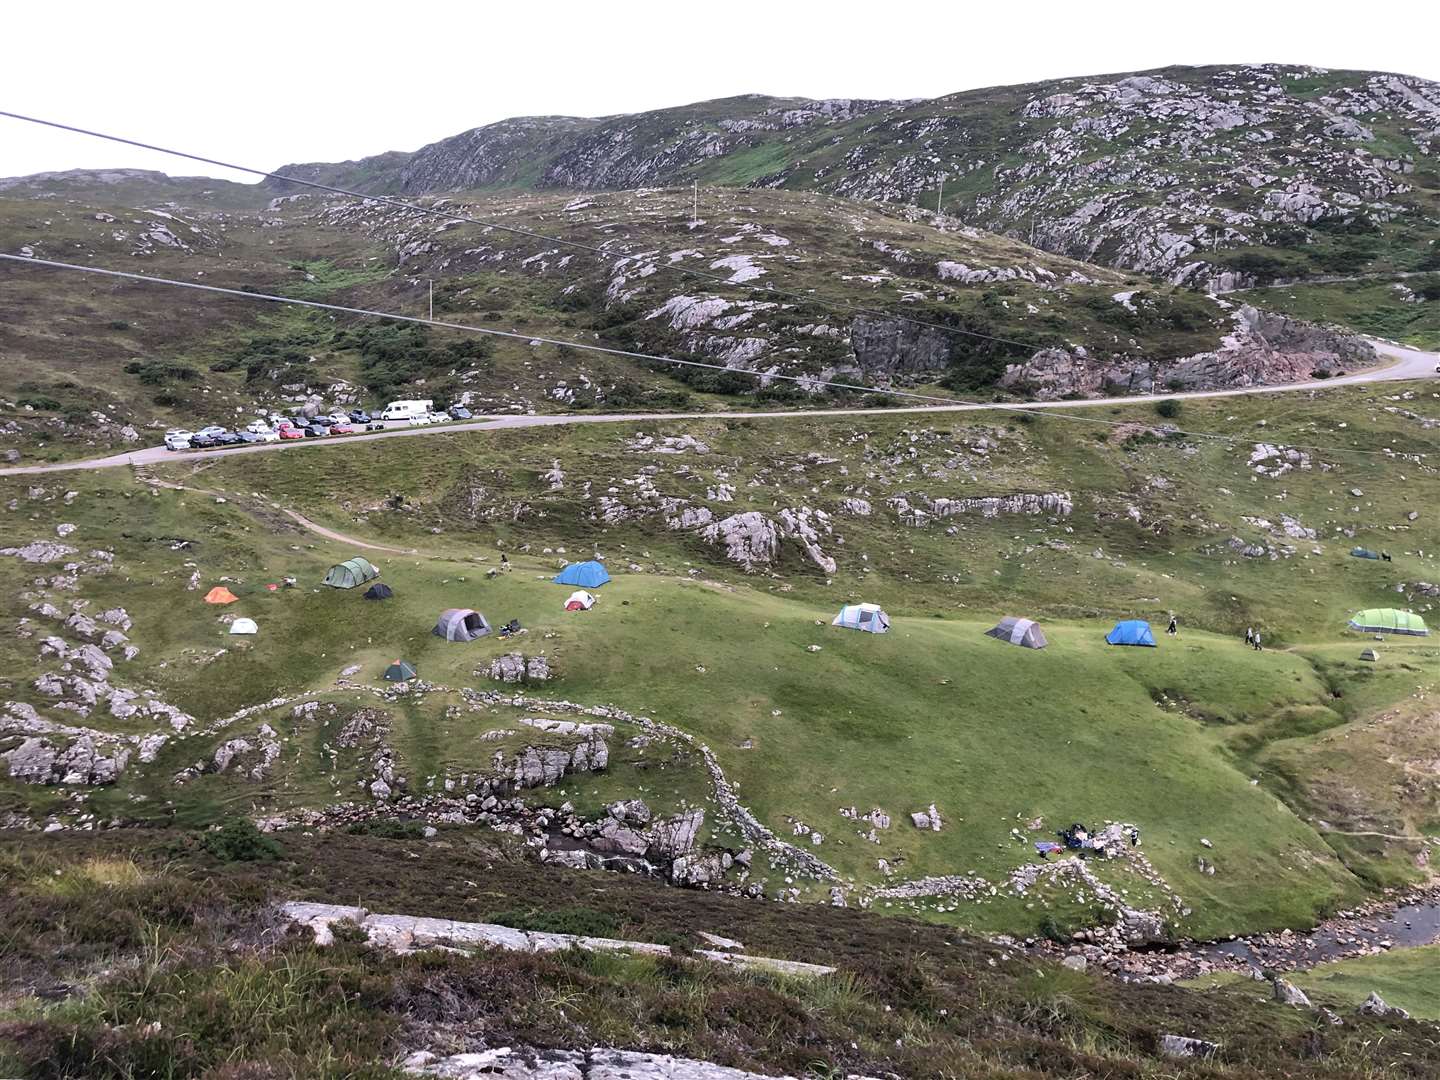 Motorhomes and tents in the Durness area of north-west Sutherland. Areas across the Highlands have been affected by the influx of visitors, some of whom are accused of behaving irresponsibly.